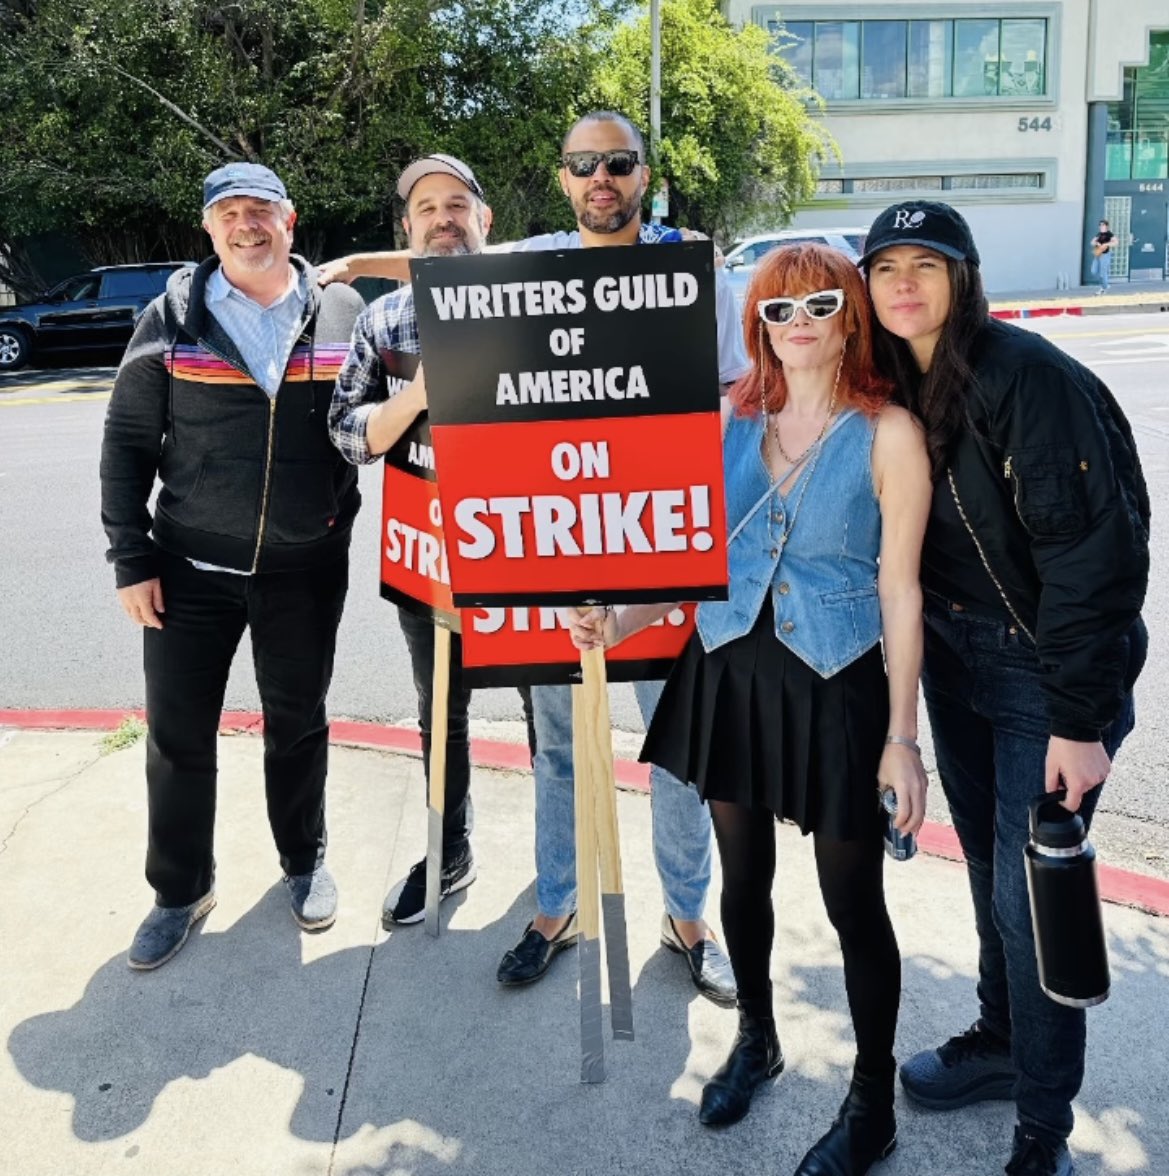 fck yes. let’s make some change. I’m standing with you all from afar ♥️ @nlyonne @cleaduvall @WGAWest @WGAEast #writersstrike